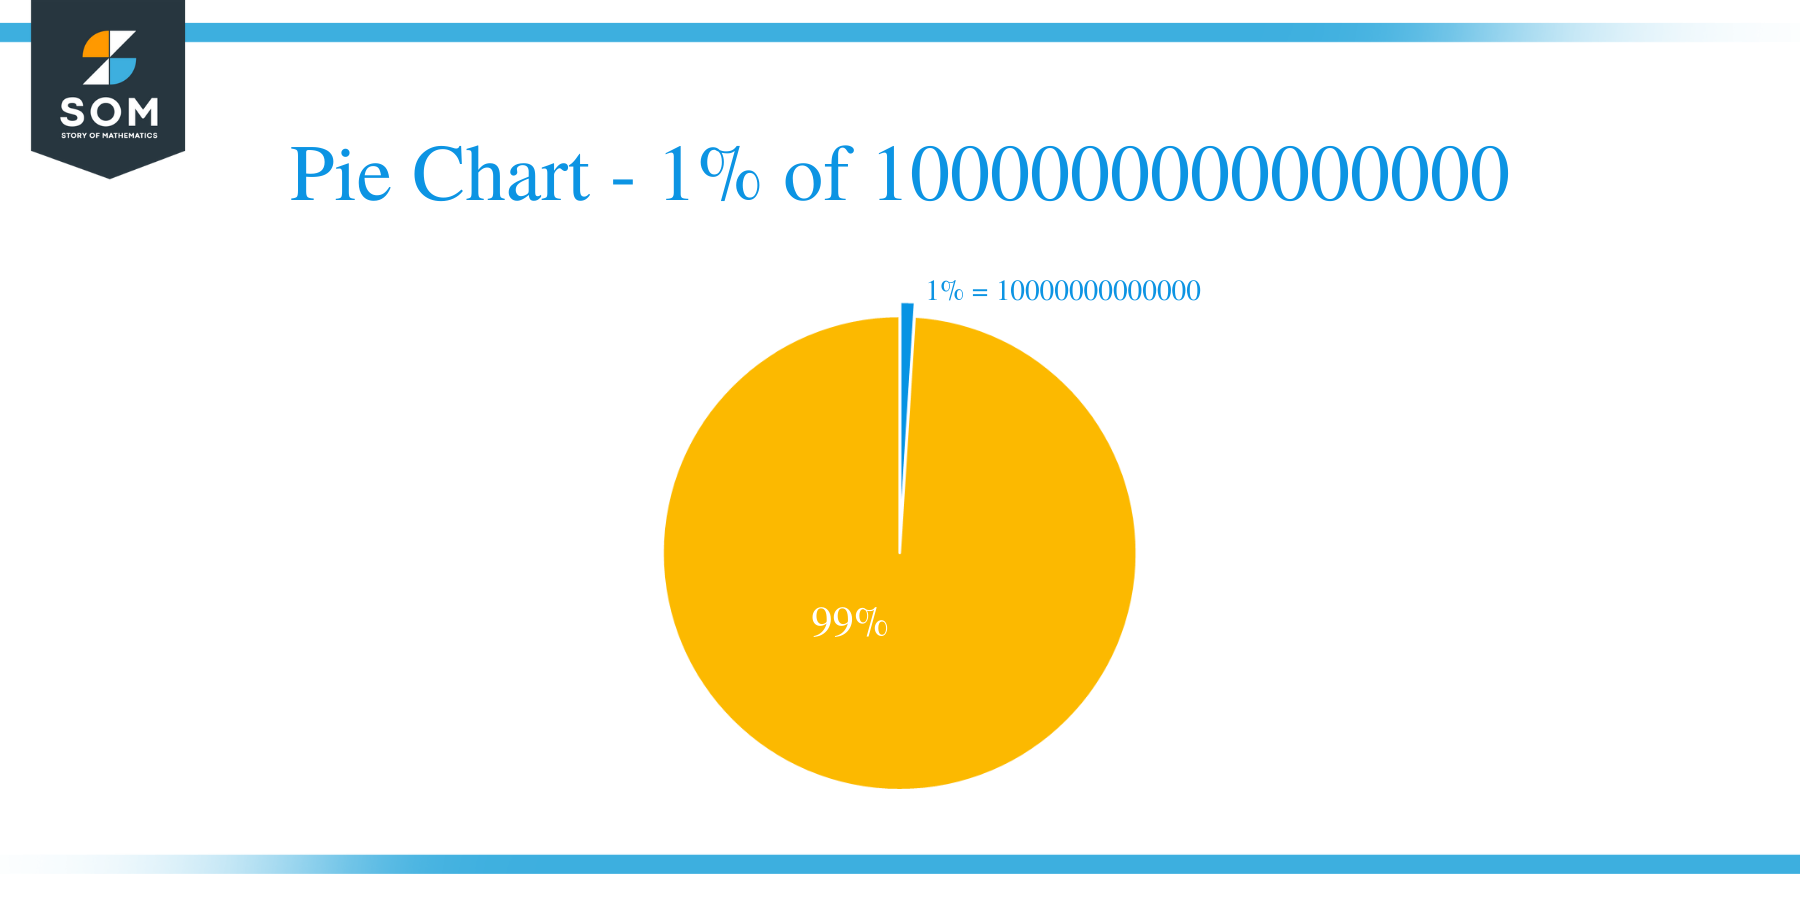 pie chart of 1 percent of 1000000000000000